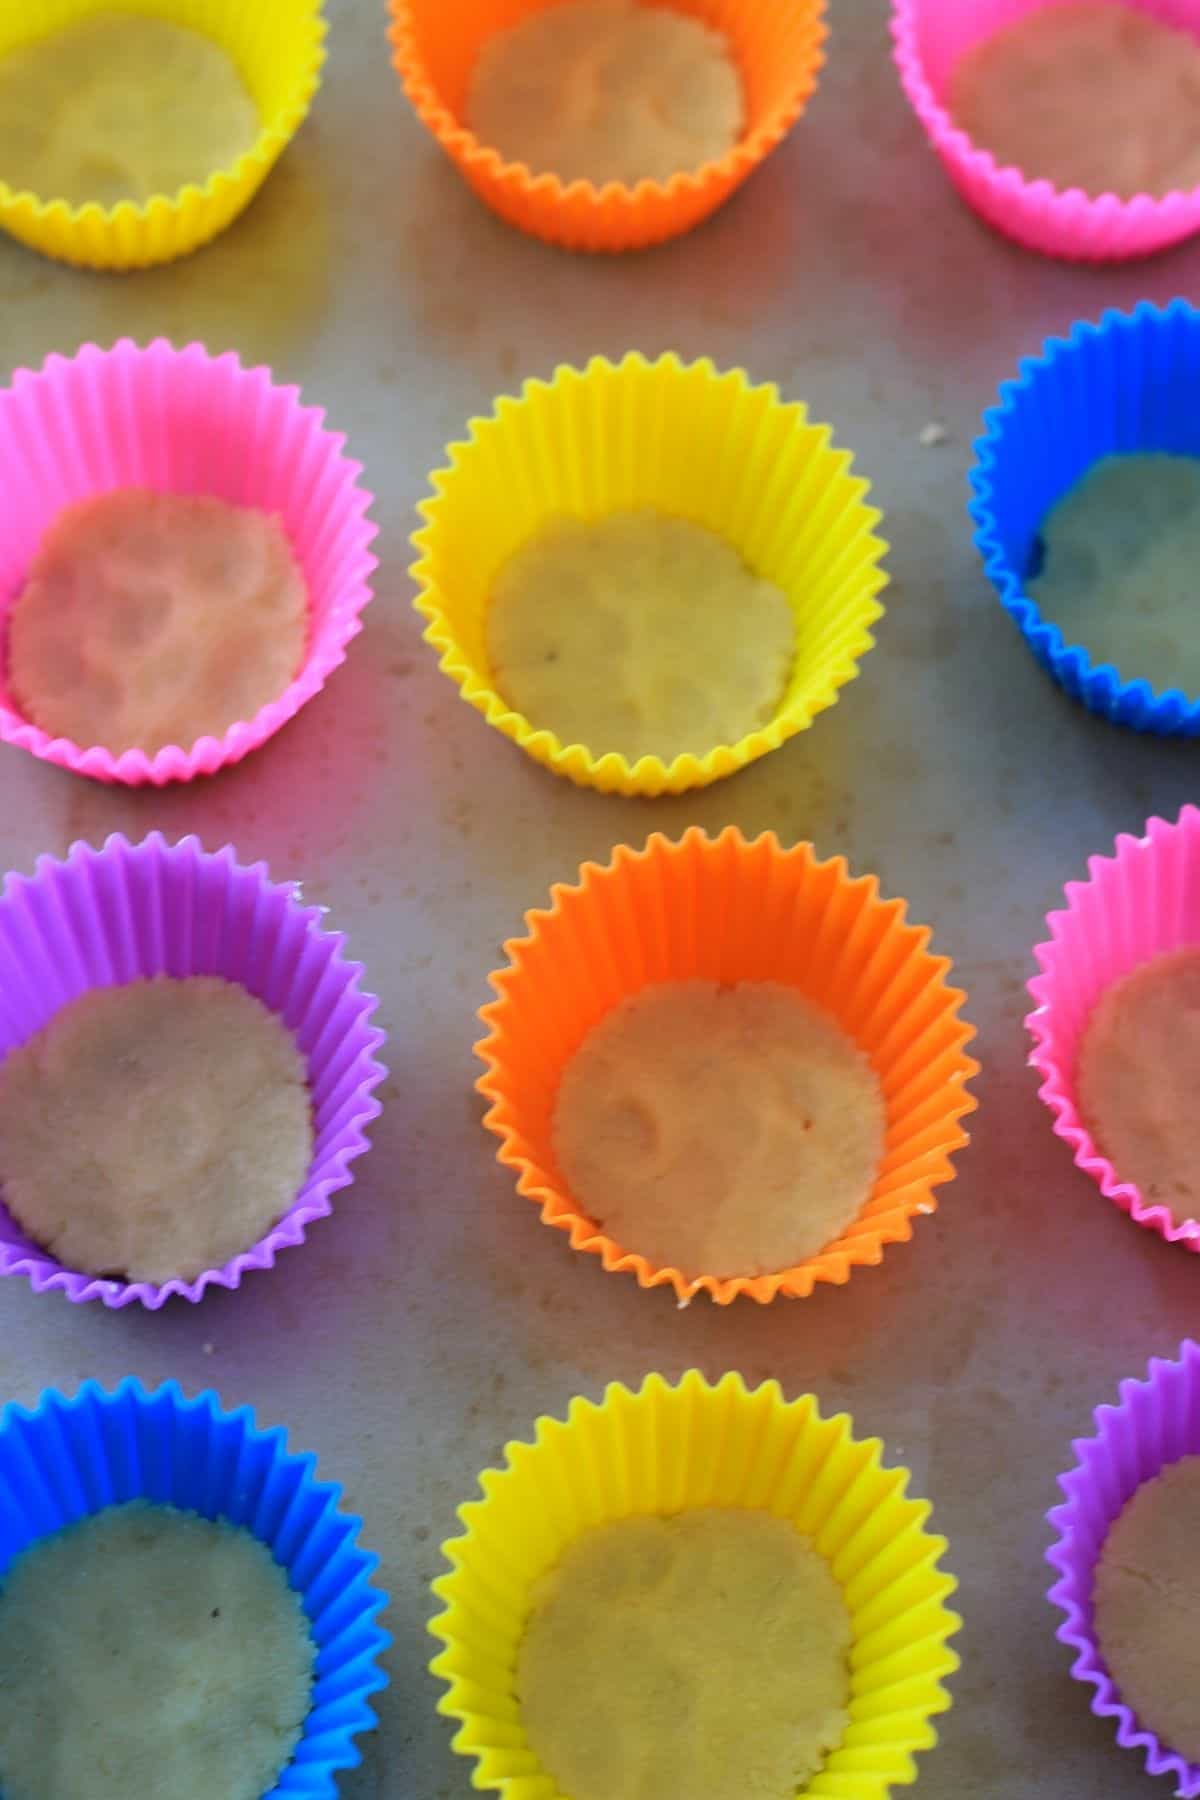 silicone cupcake liners filled with the almond crust.